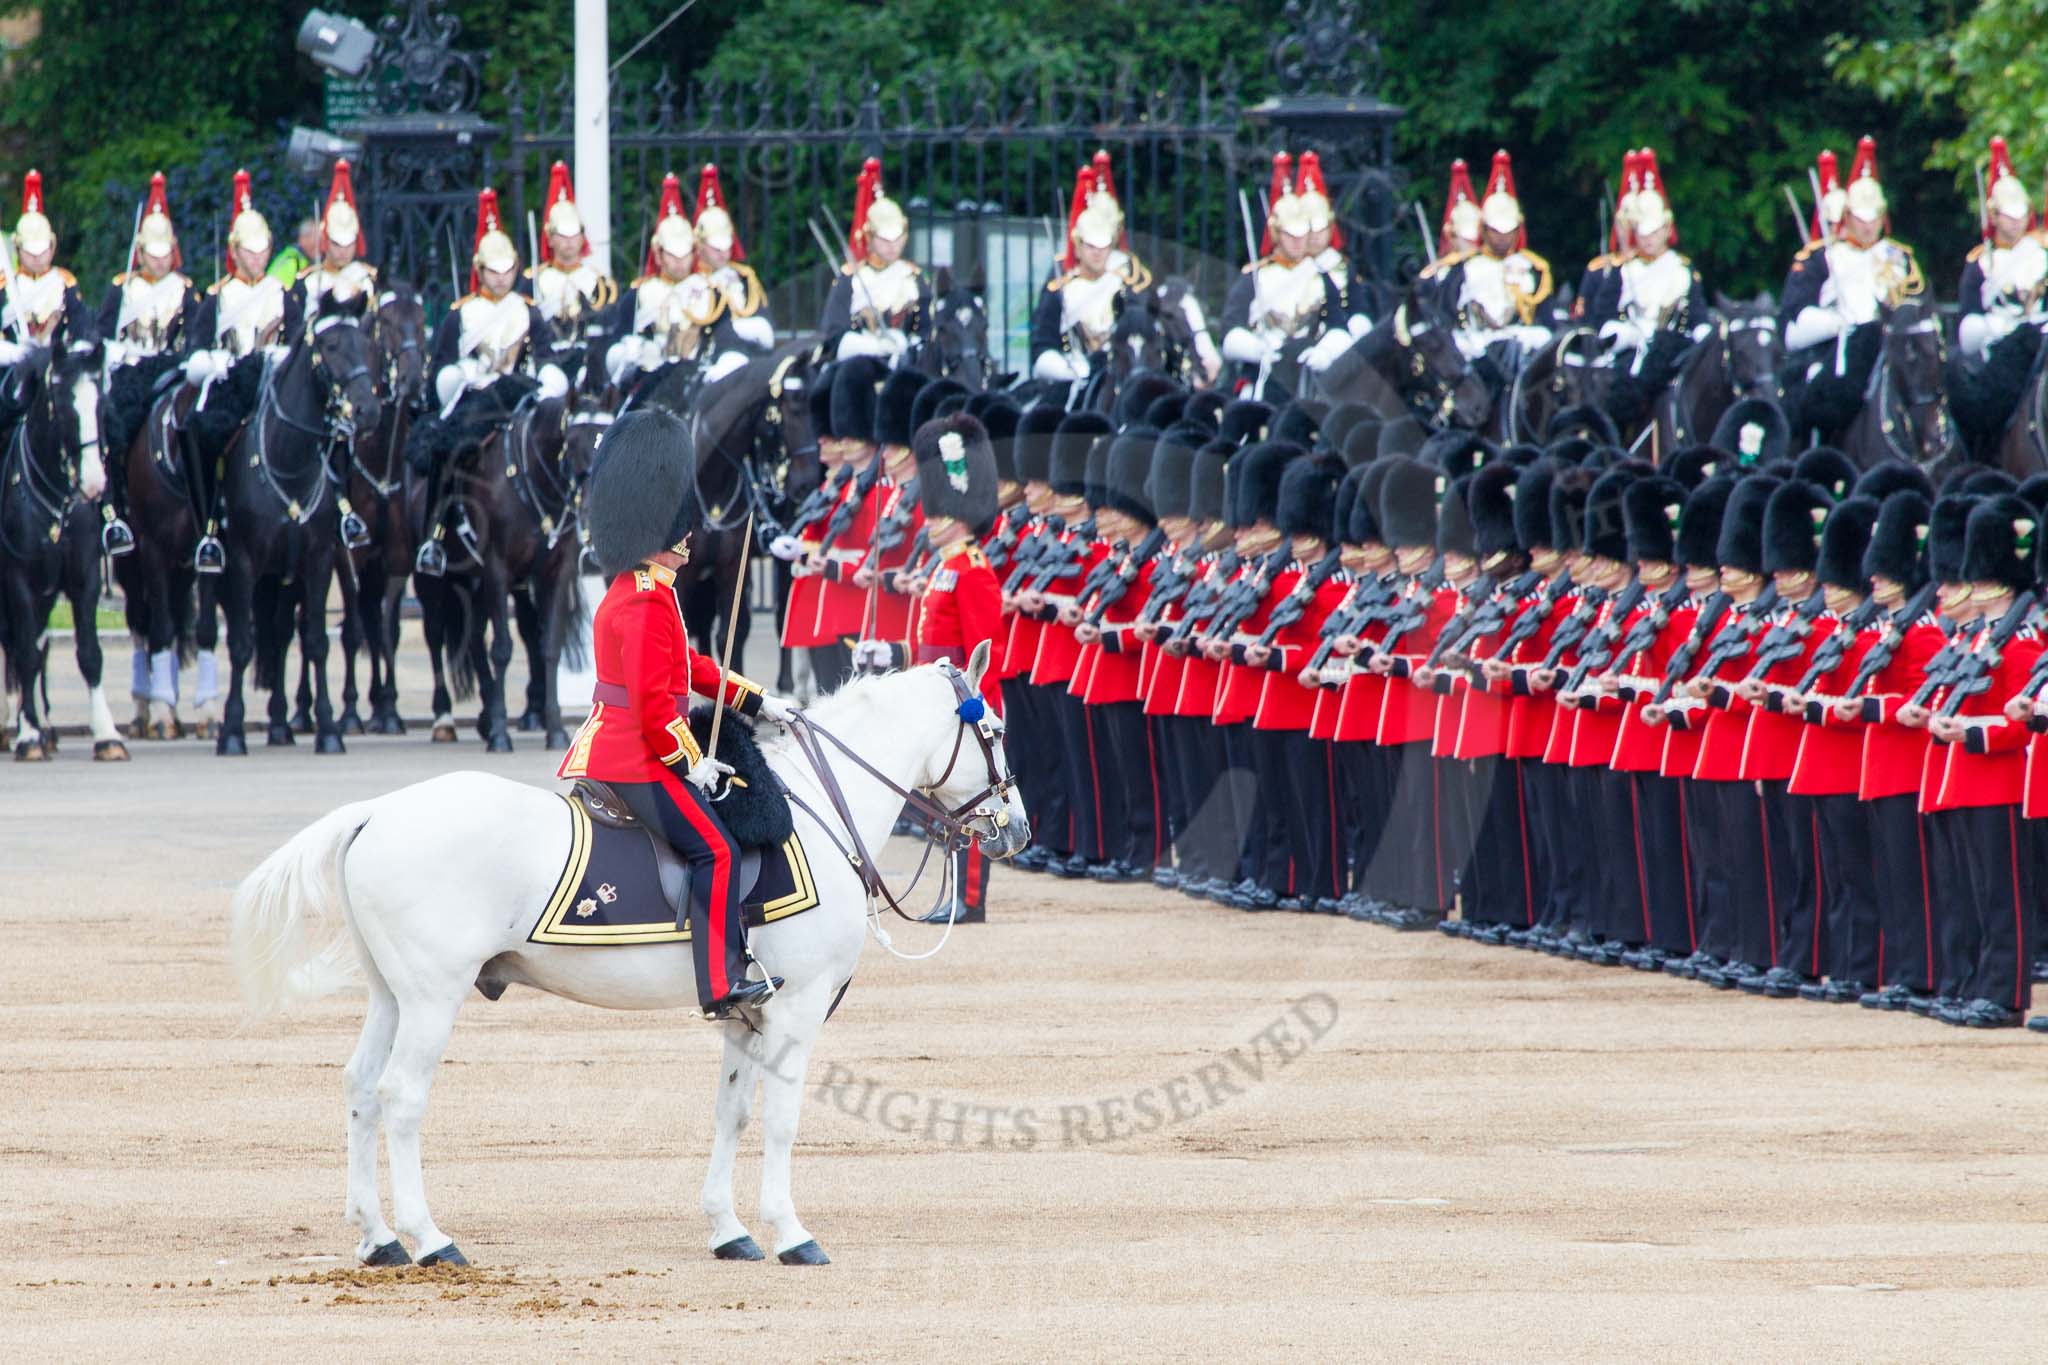 Major General's Review 2013: The Field Officer, in front of No. 2 Guard, 1st Battalion Welsh Guards, is about to inform HM The Queen that the troops are ready for the March Past..
Horse Guards Parade, Westminster,
London SW1,

United Kingdom,
on 01 June 2013 at 11:29, image #450